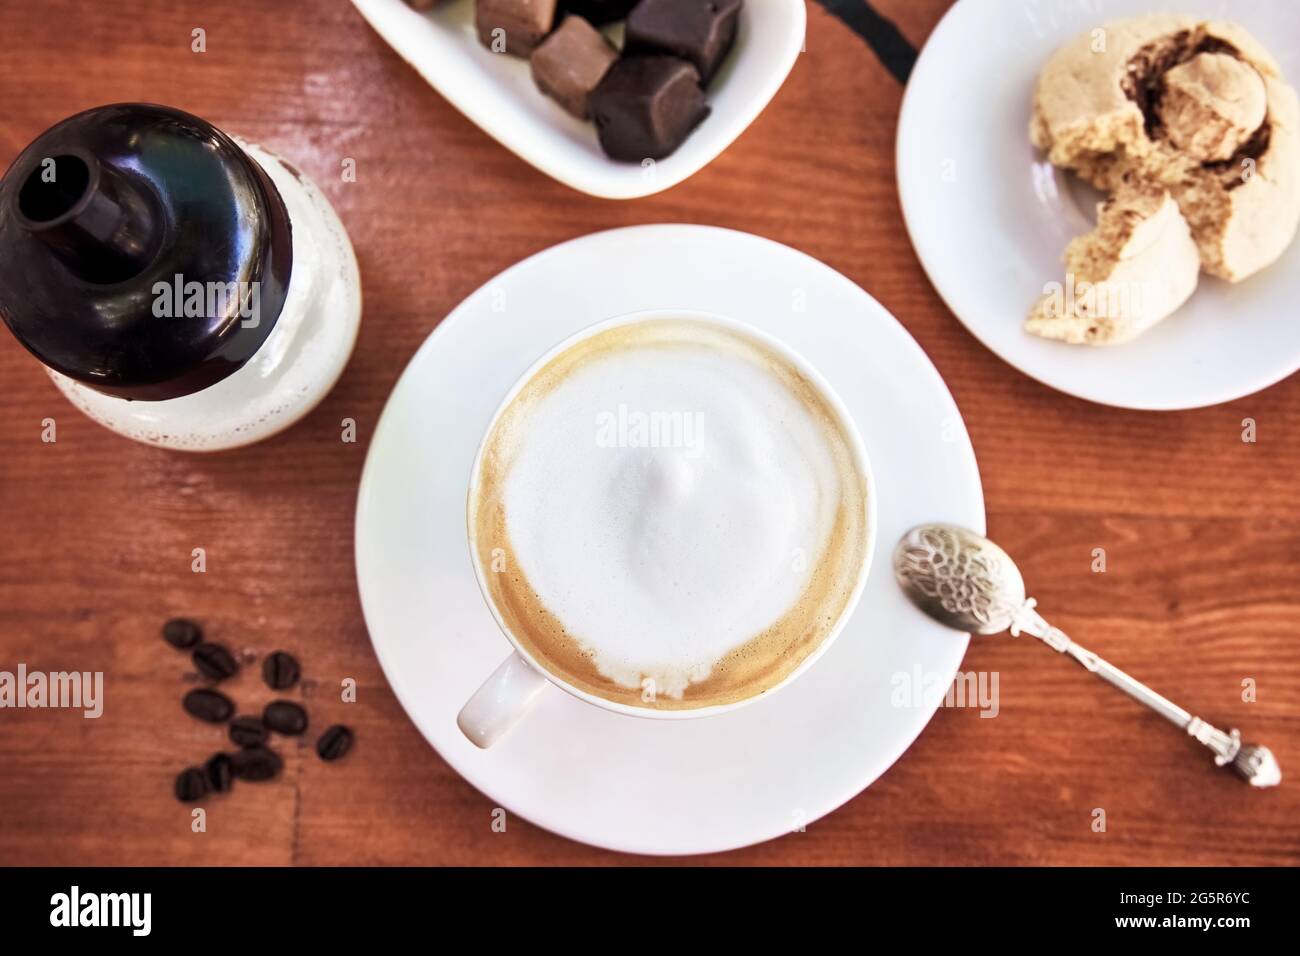 Cup of cappuccino coffee on wooden table with cookie and chocolate. Stock Photo